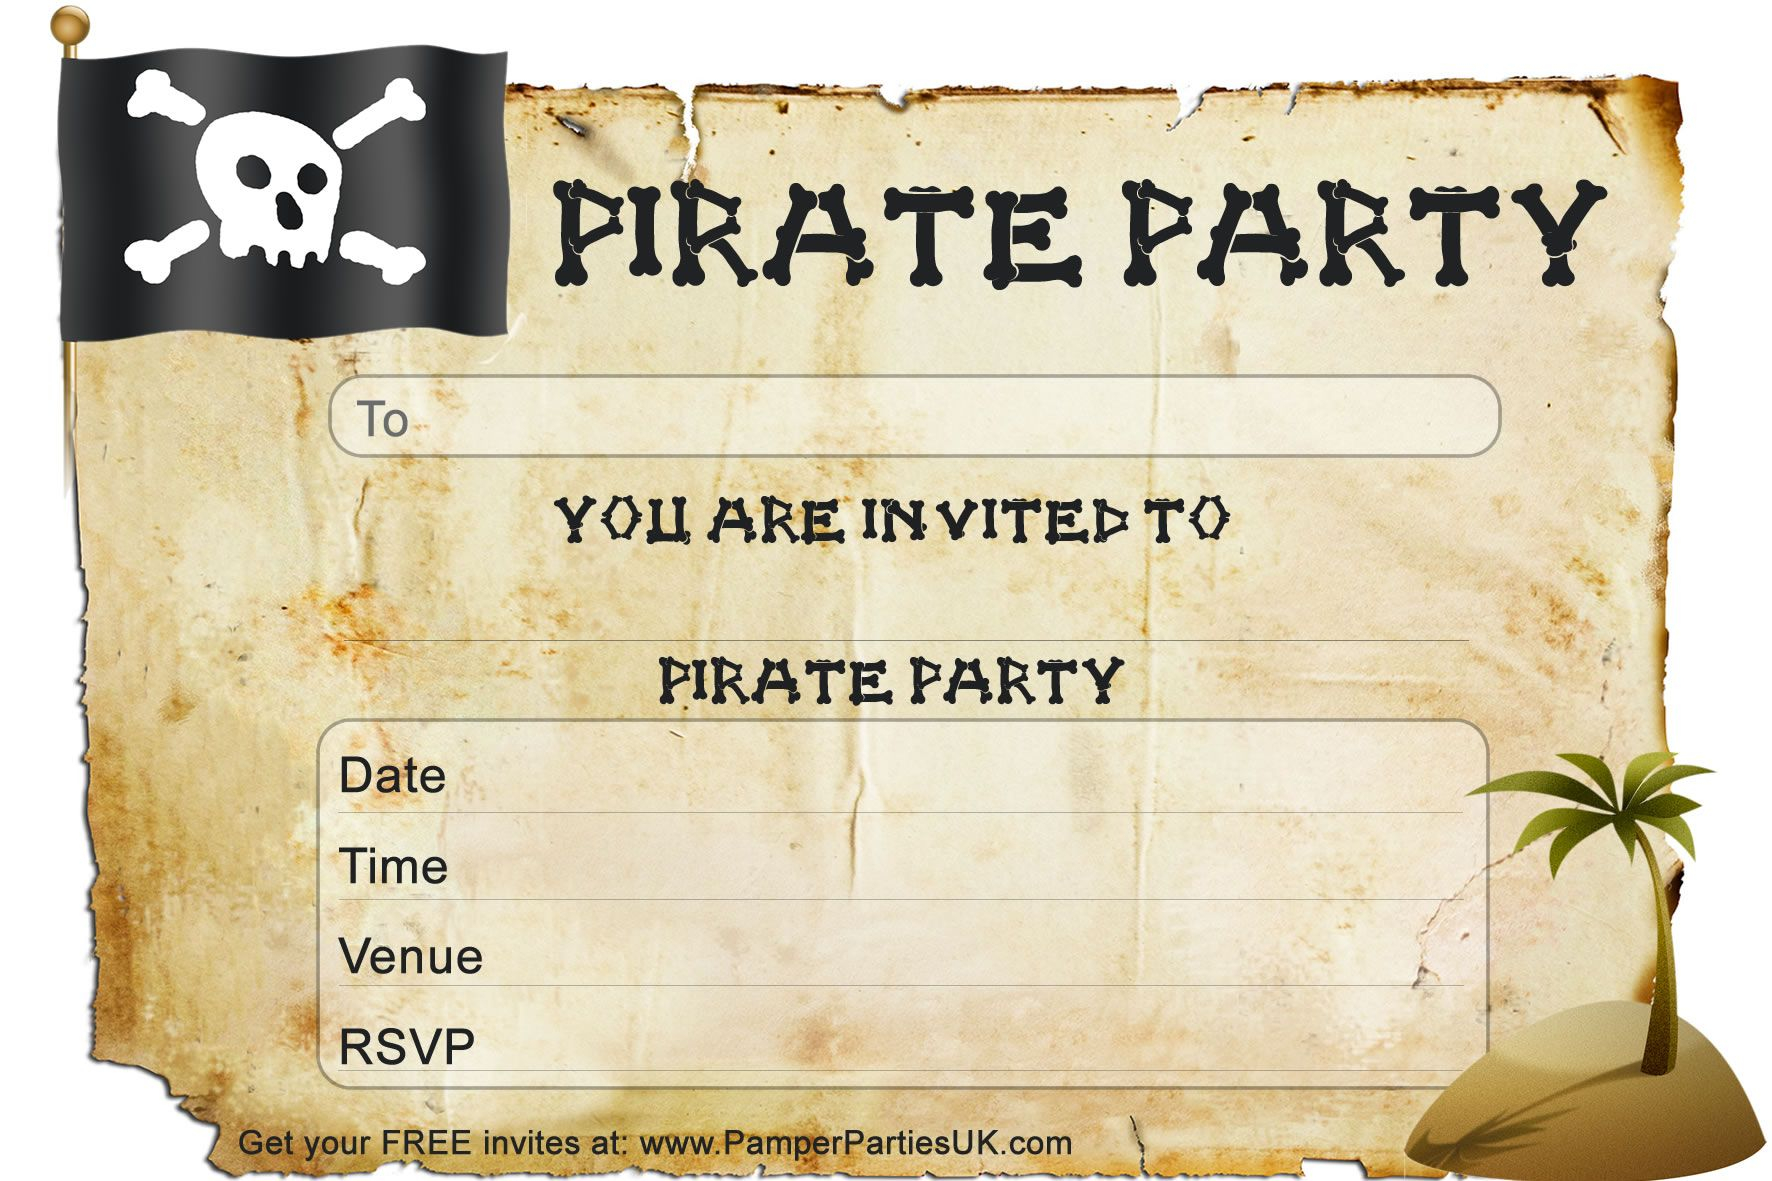 Free Pirate Party Invitations Free Pirate Party Invitations pertaining to measurements 1772 X 1181